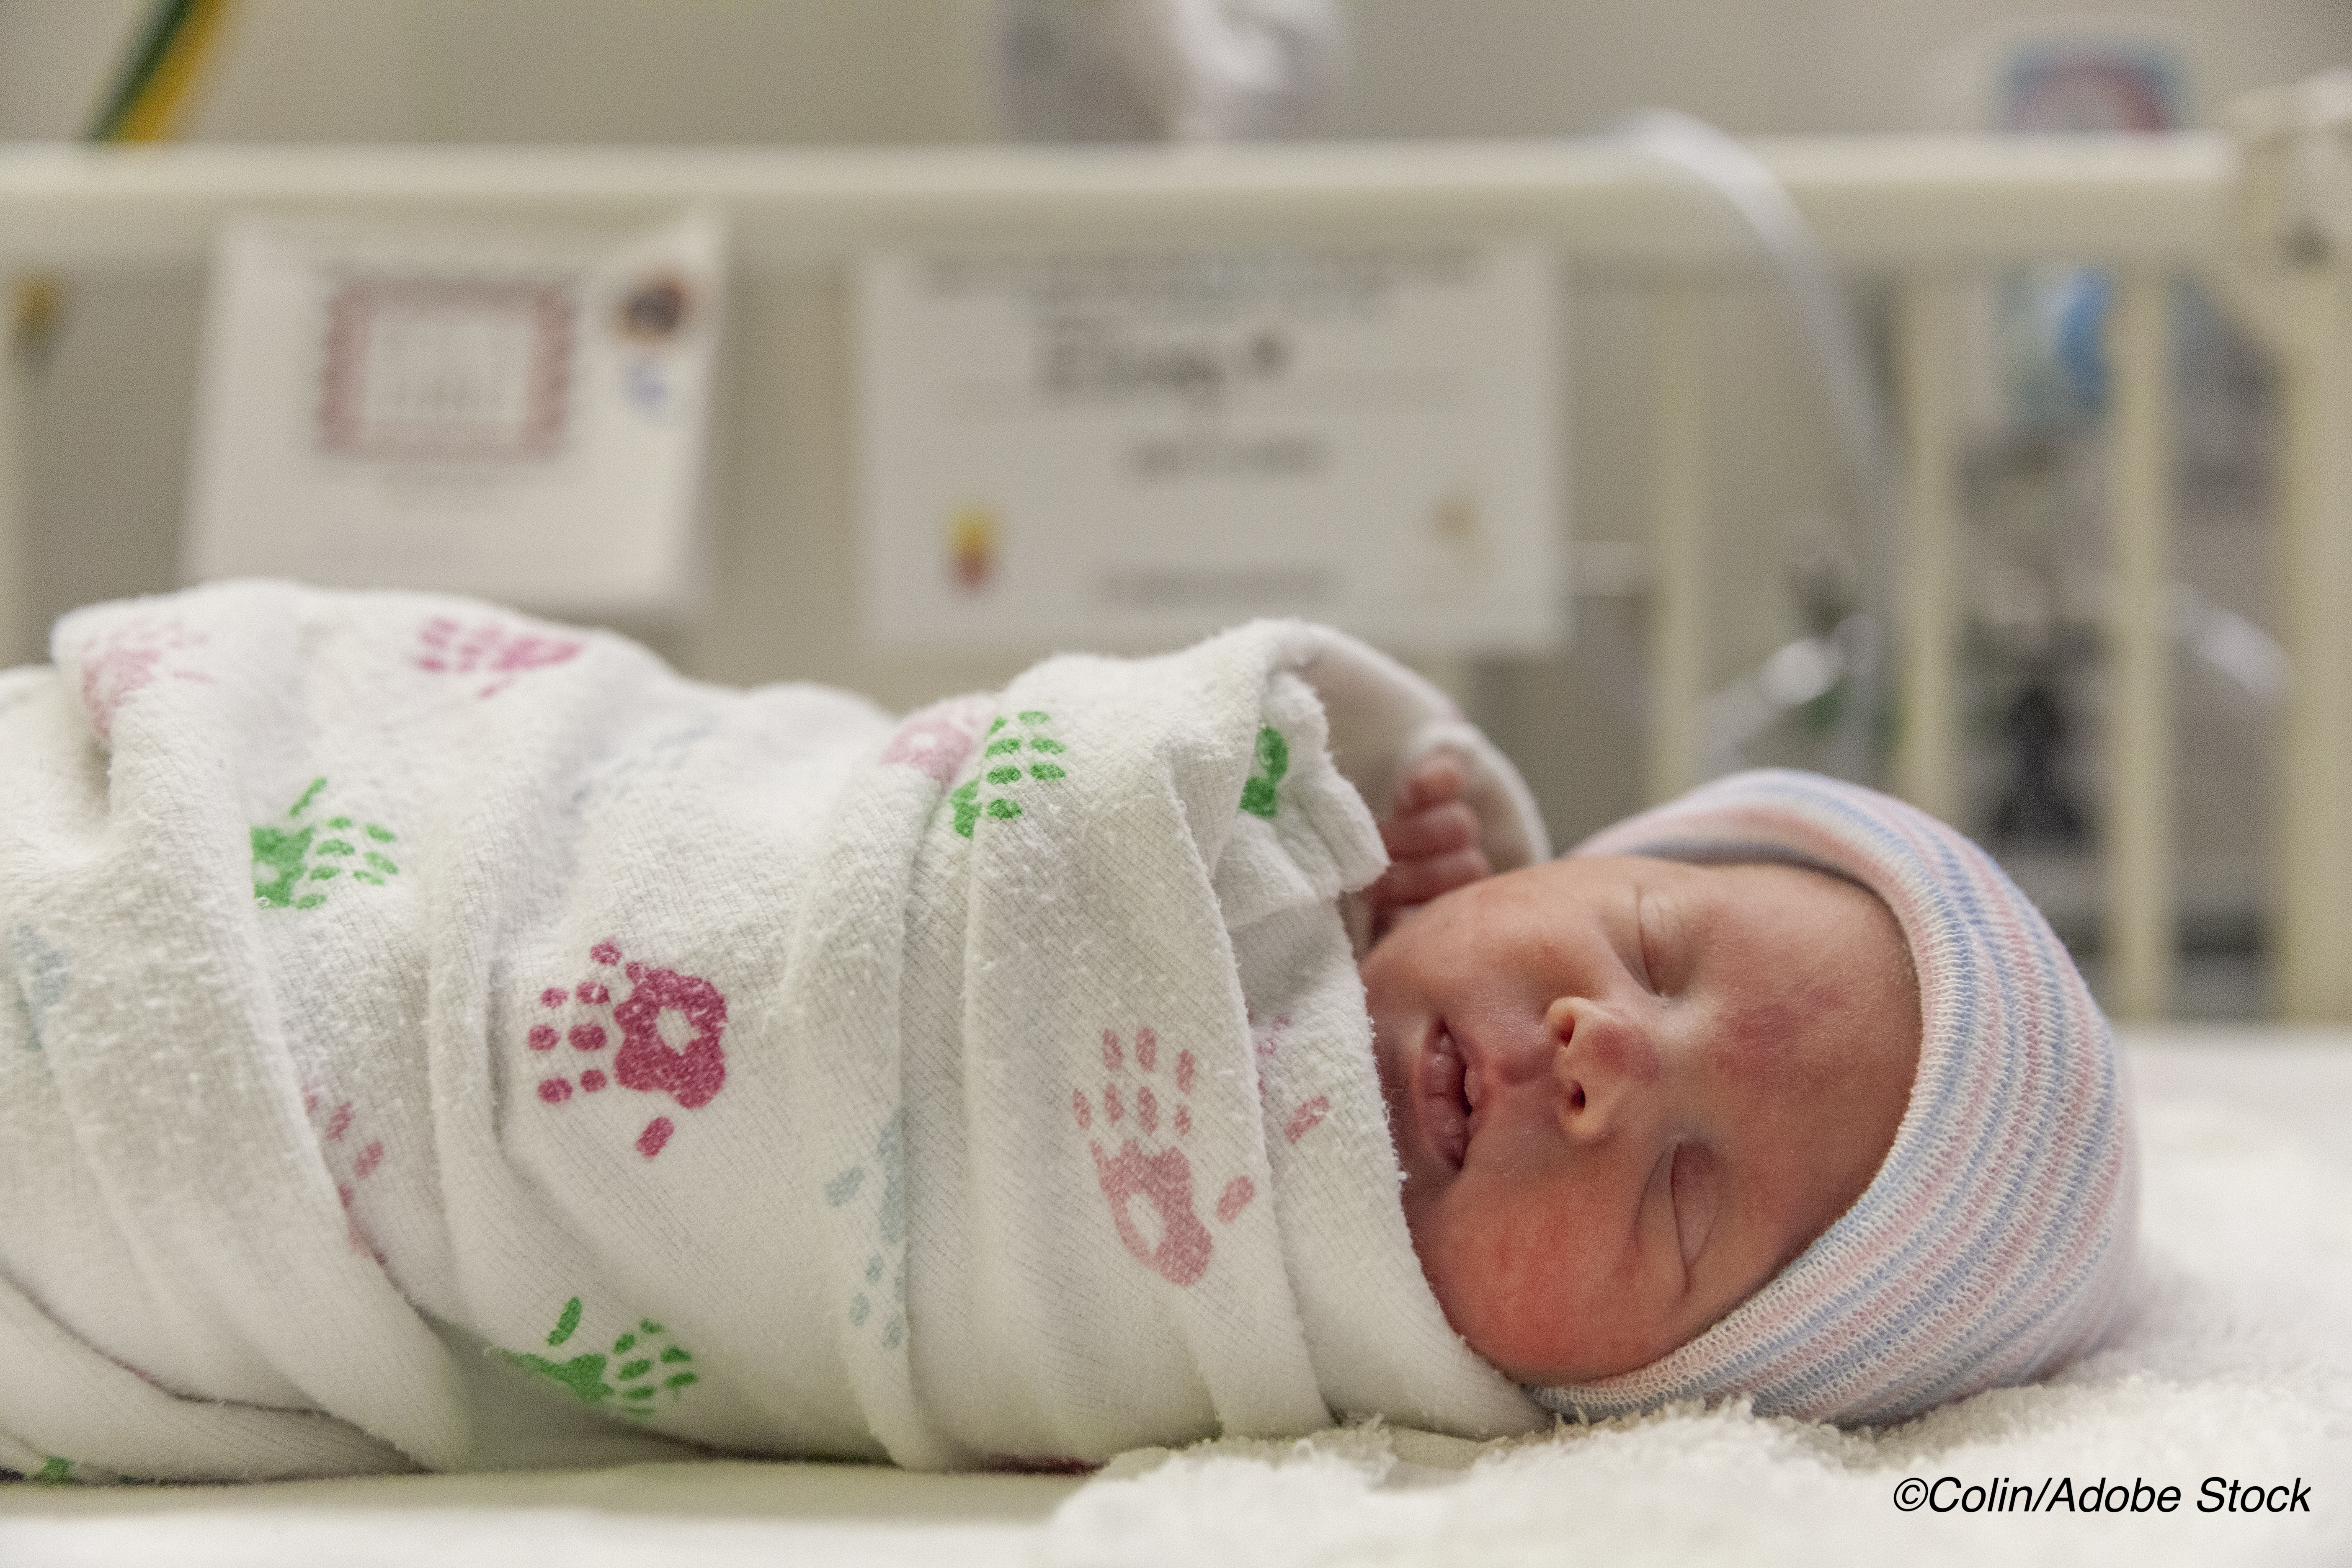 Cha-Ching: Surprise Hospital Bills Greet Many New Parents